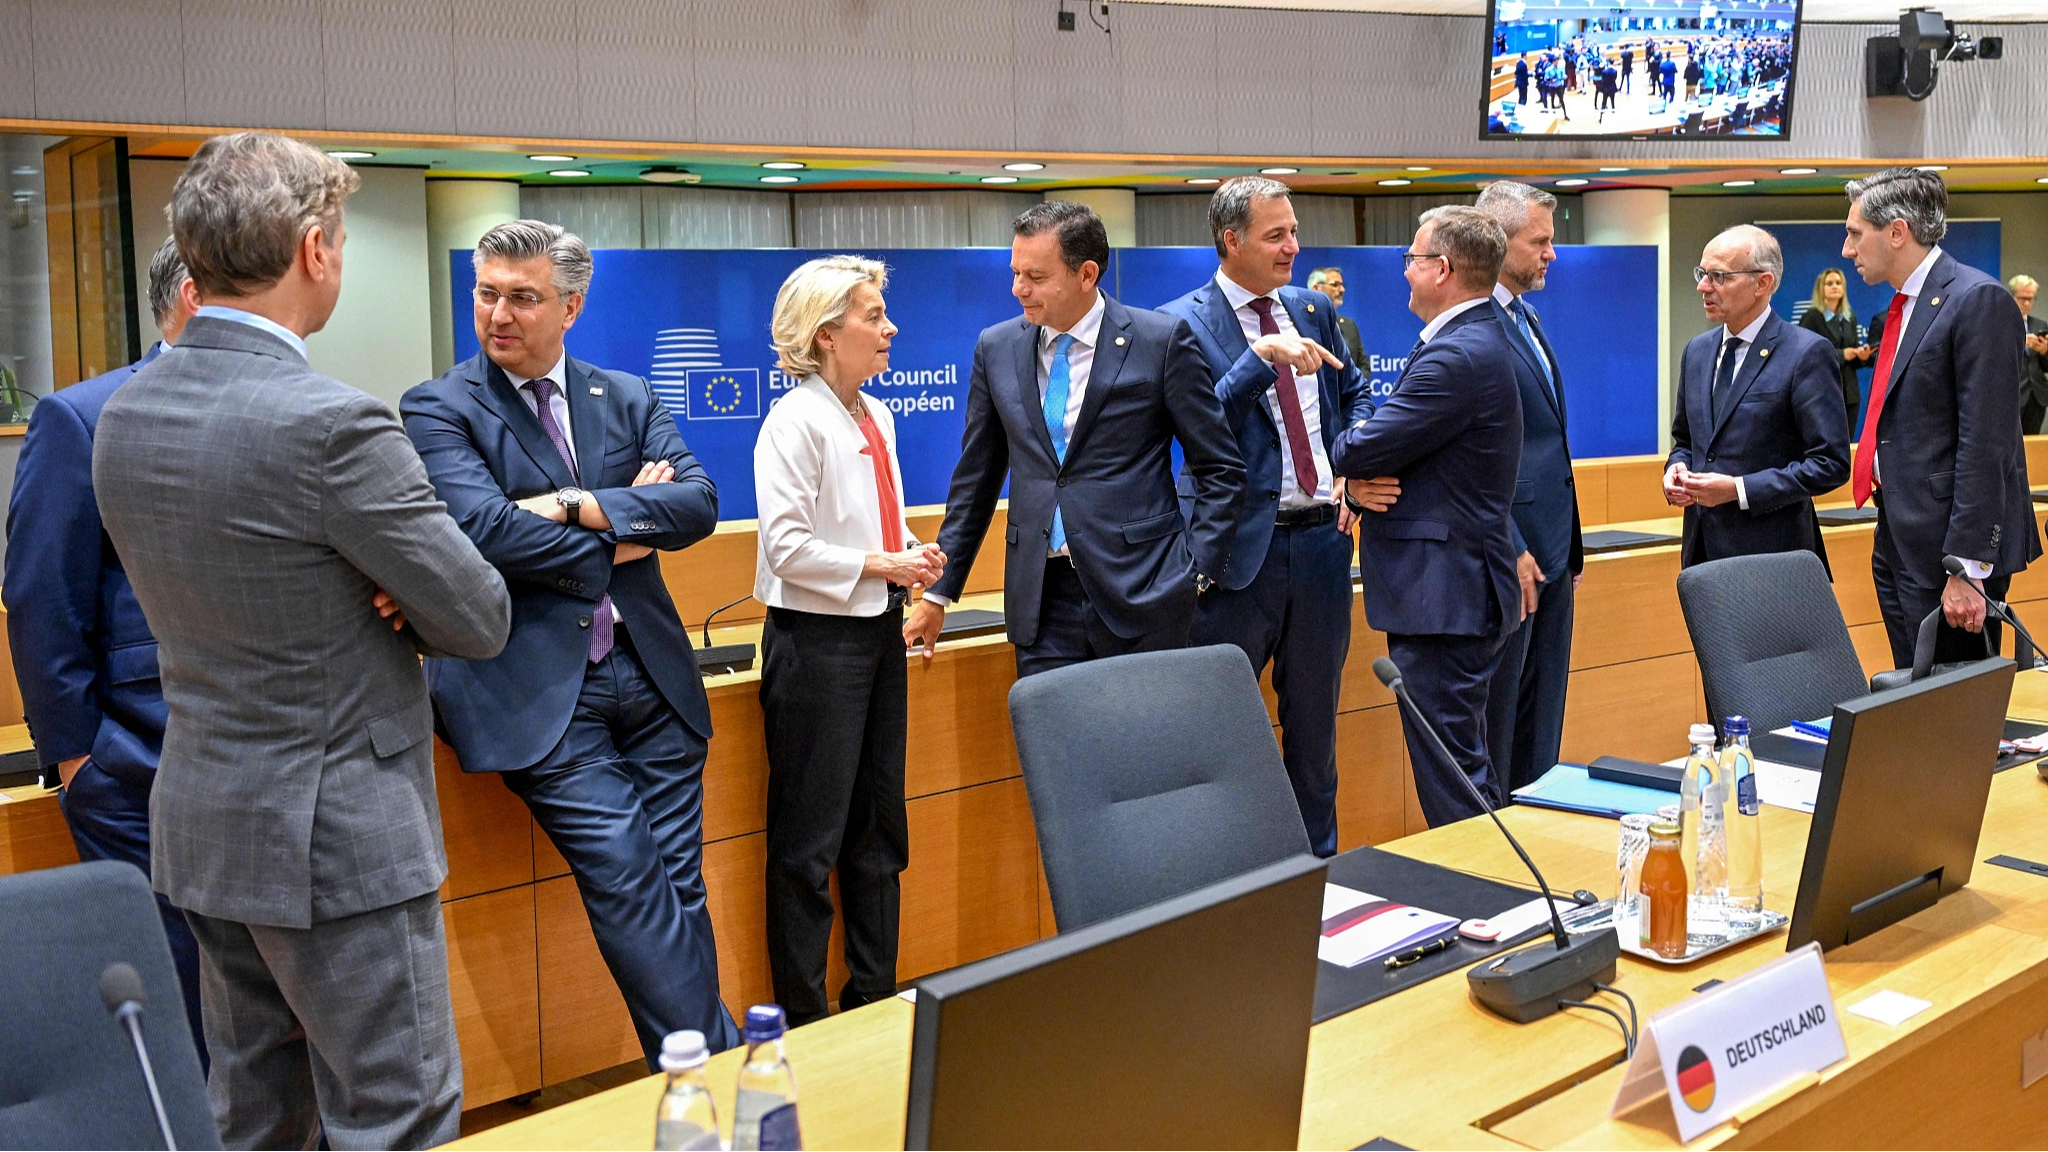 EU leaders and representatives talk ahead of an informal EU leaders summit to discuss electing the President of the European Council, nominating the President of the European Commission and appointing the High Representative of the Union for Foreign Affairs and Security Policy, in Brussels, on June 17, 2024. /CFP